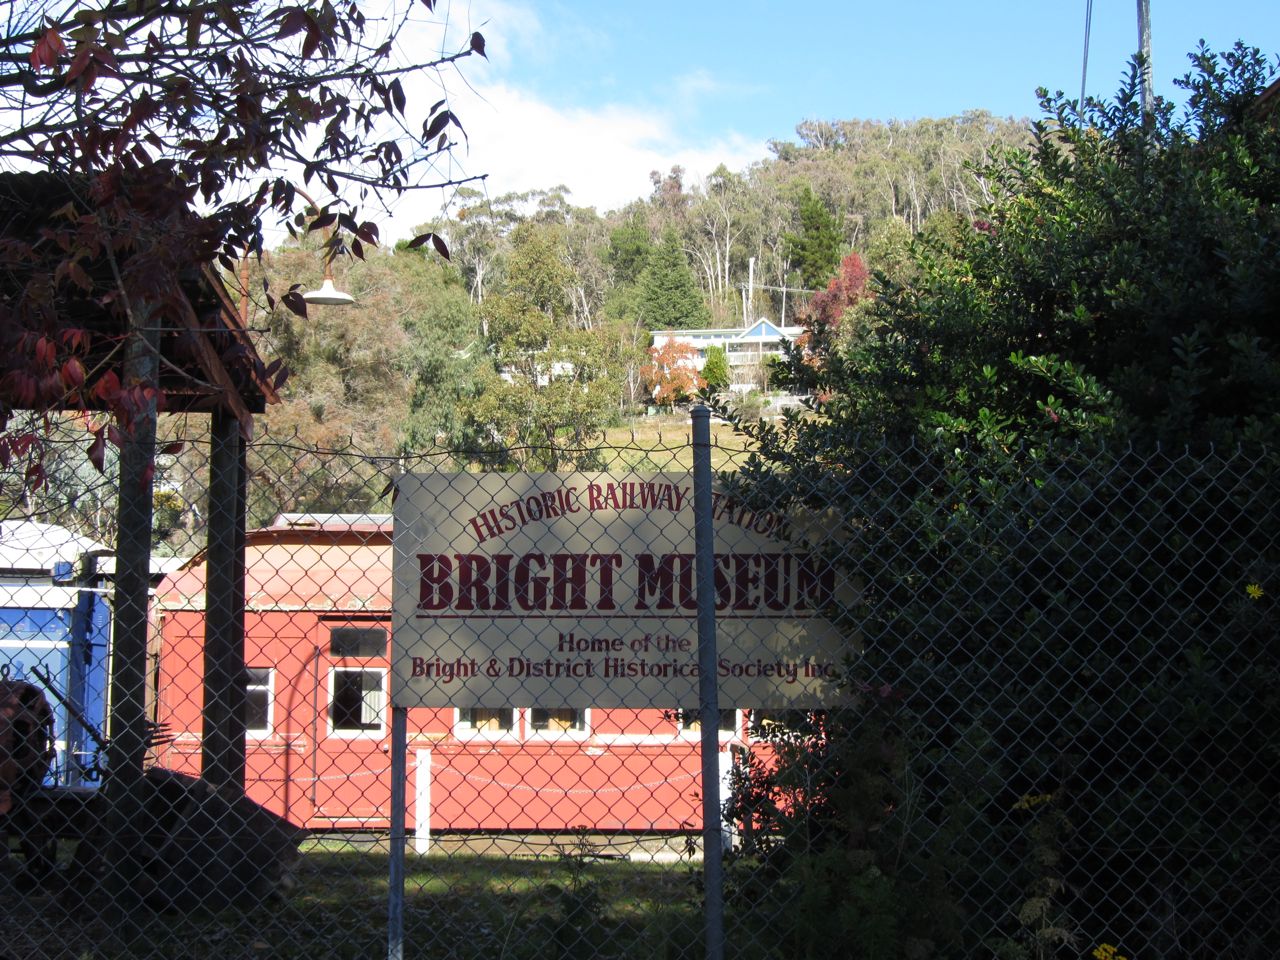 Bright Museum at the deprecated railway station features deprecated rolling stock.